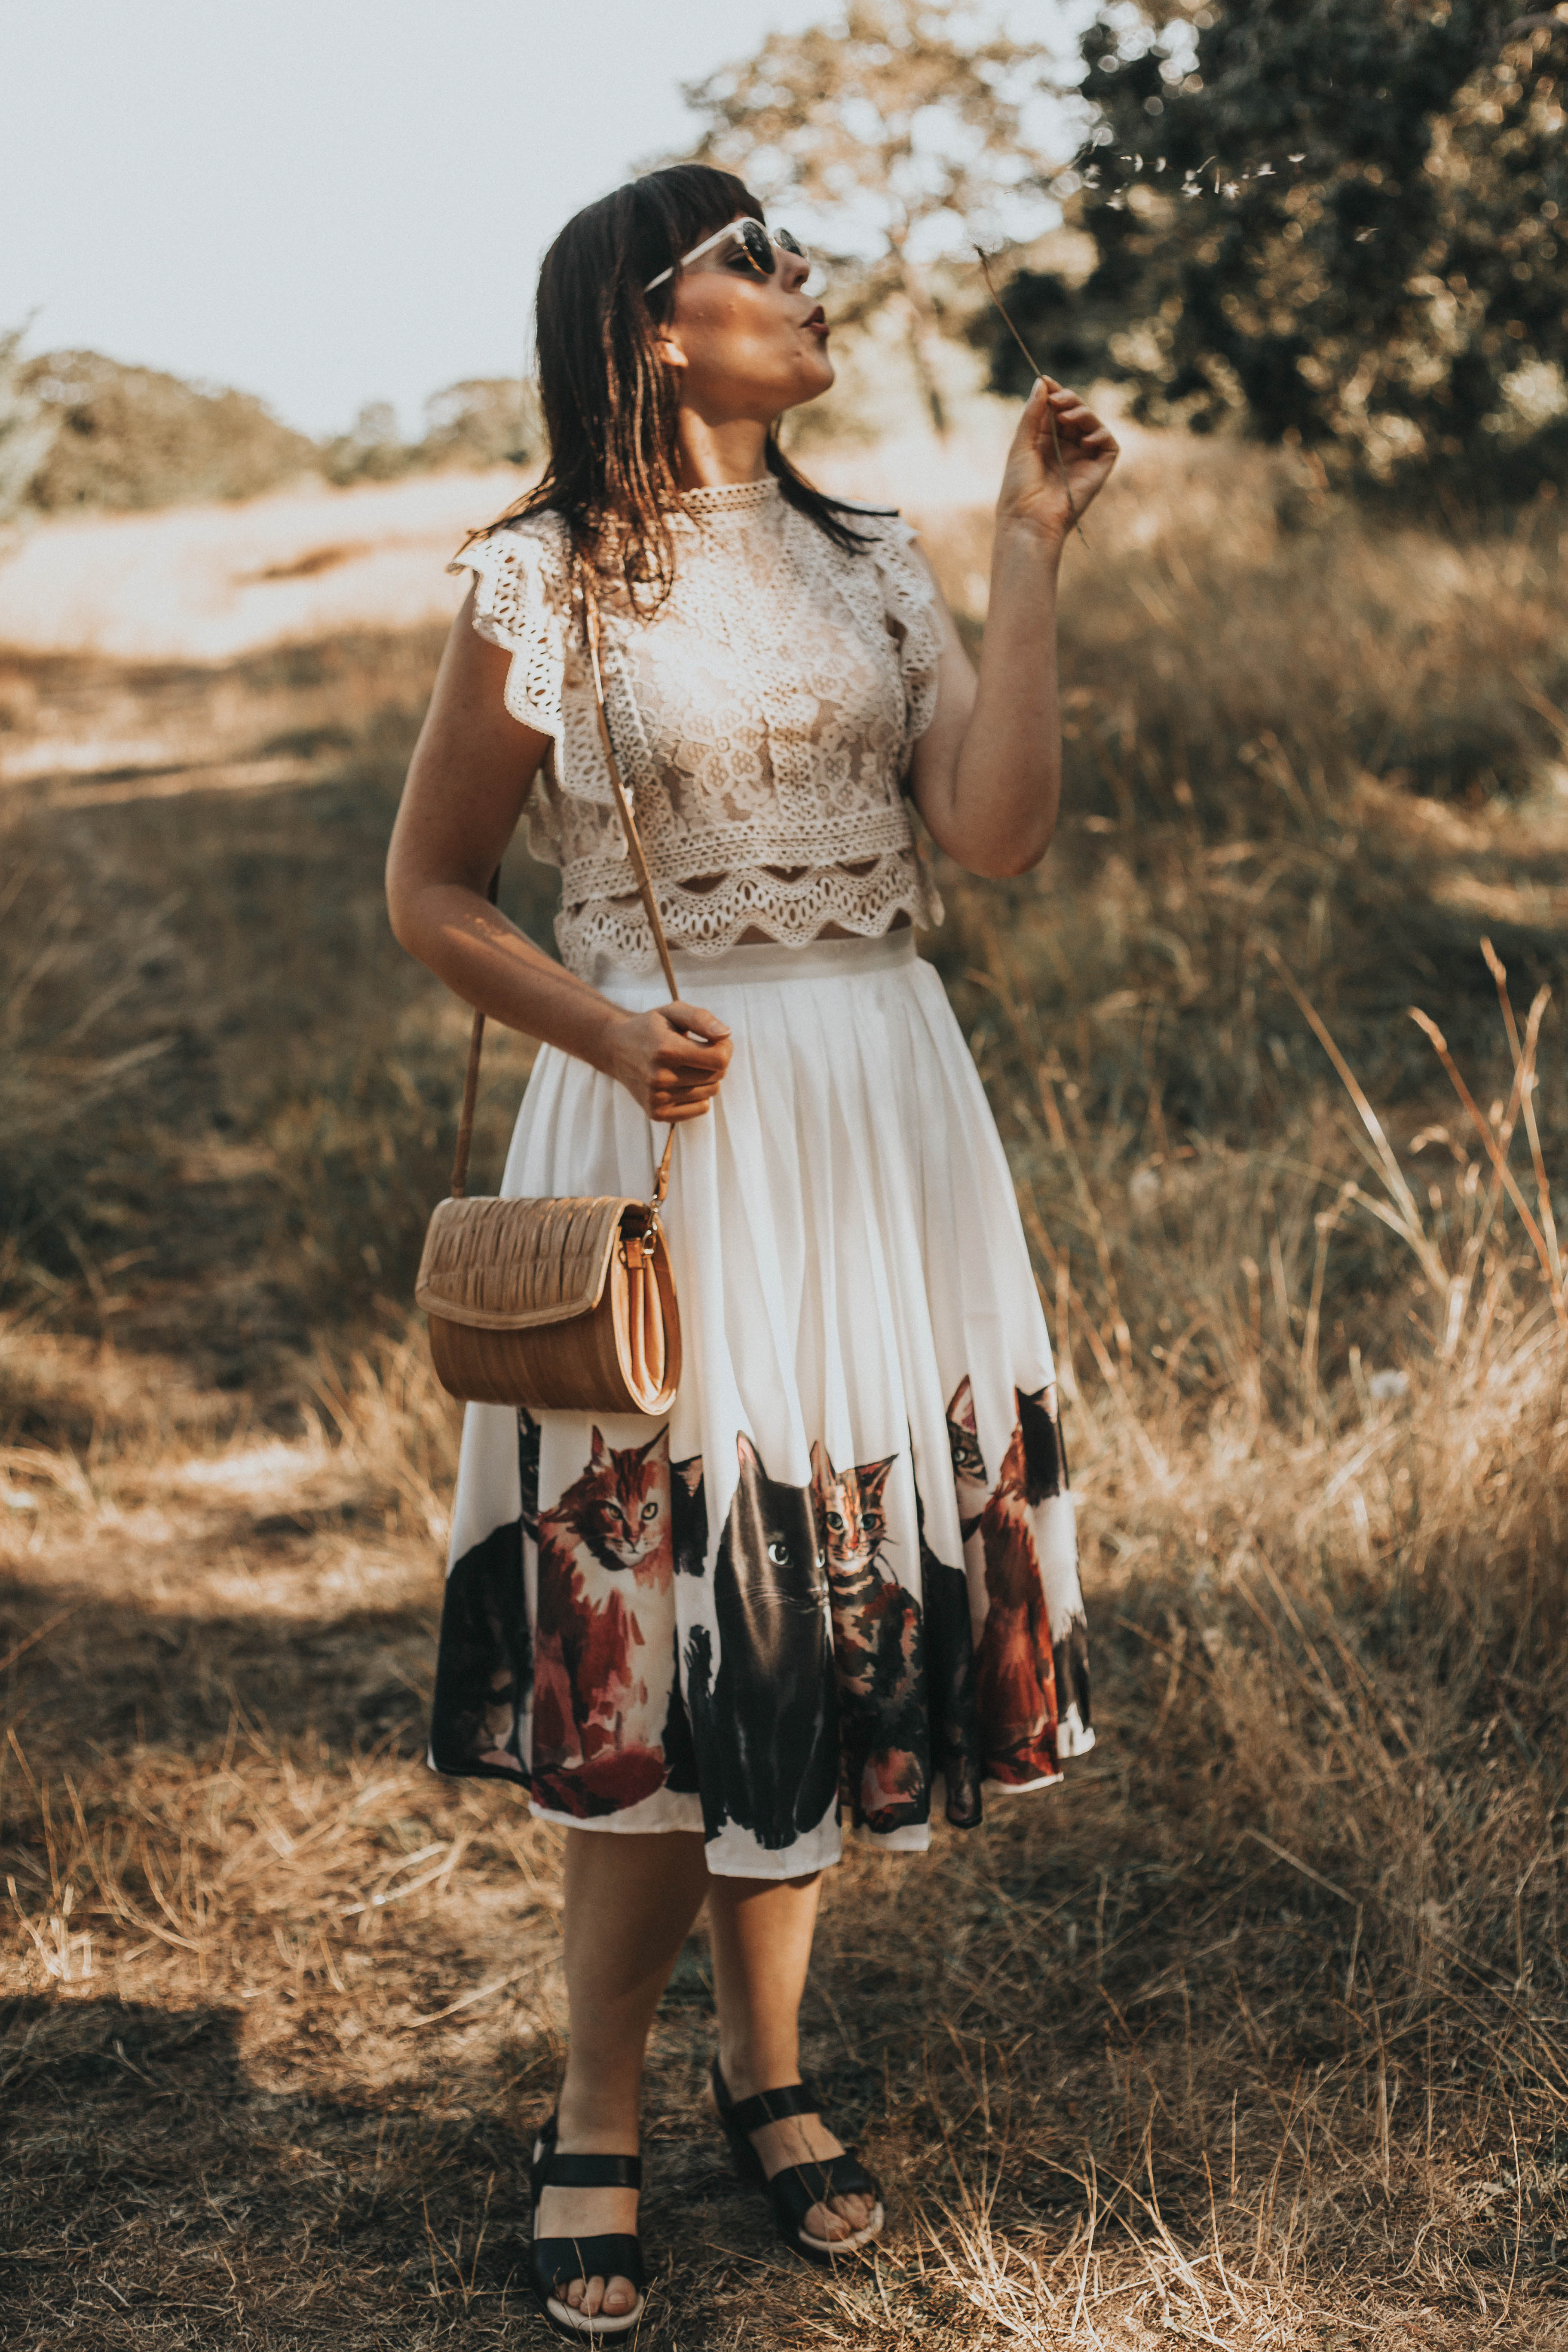 Perfect Summer Vibes: Chicwish Watercolor Maxi Skirt with Free